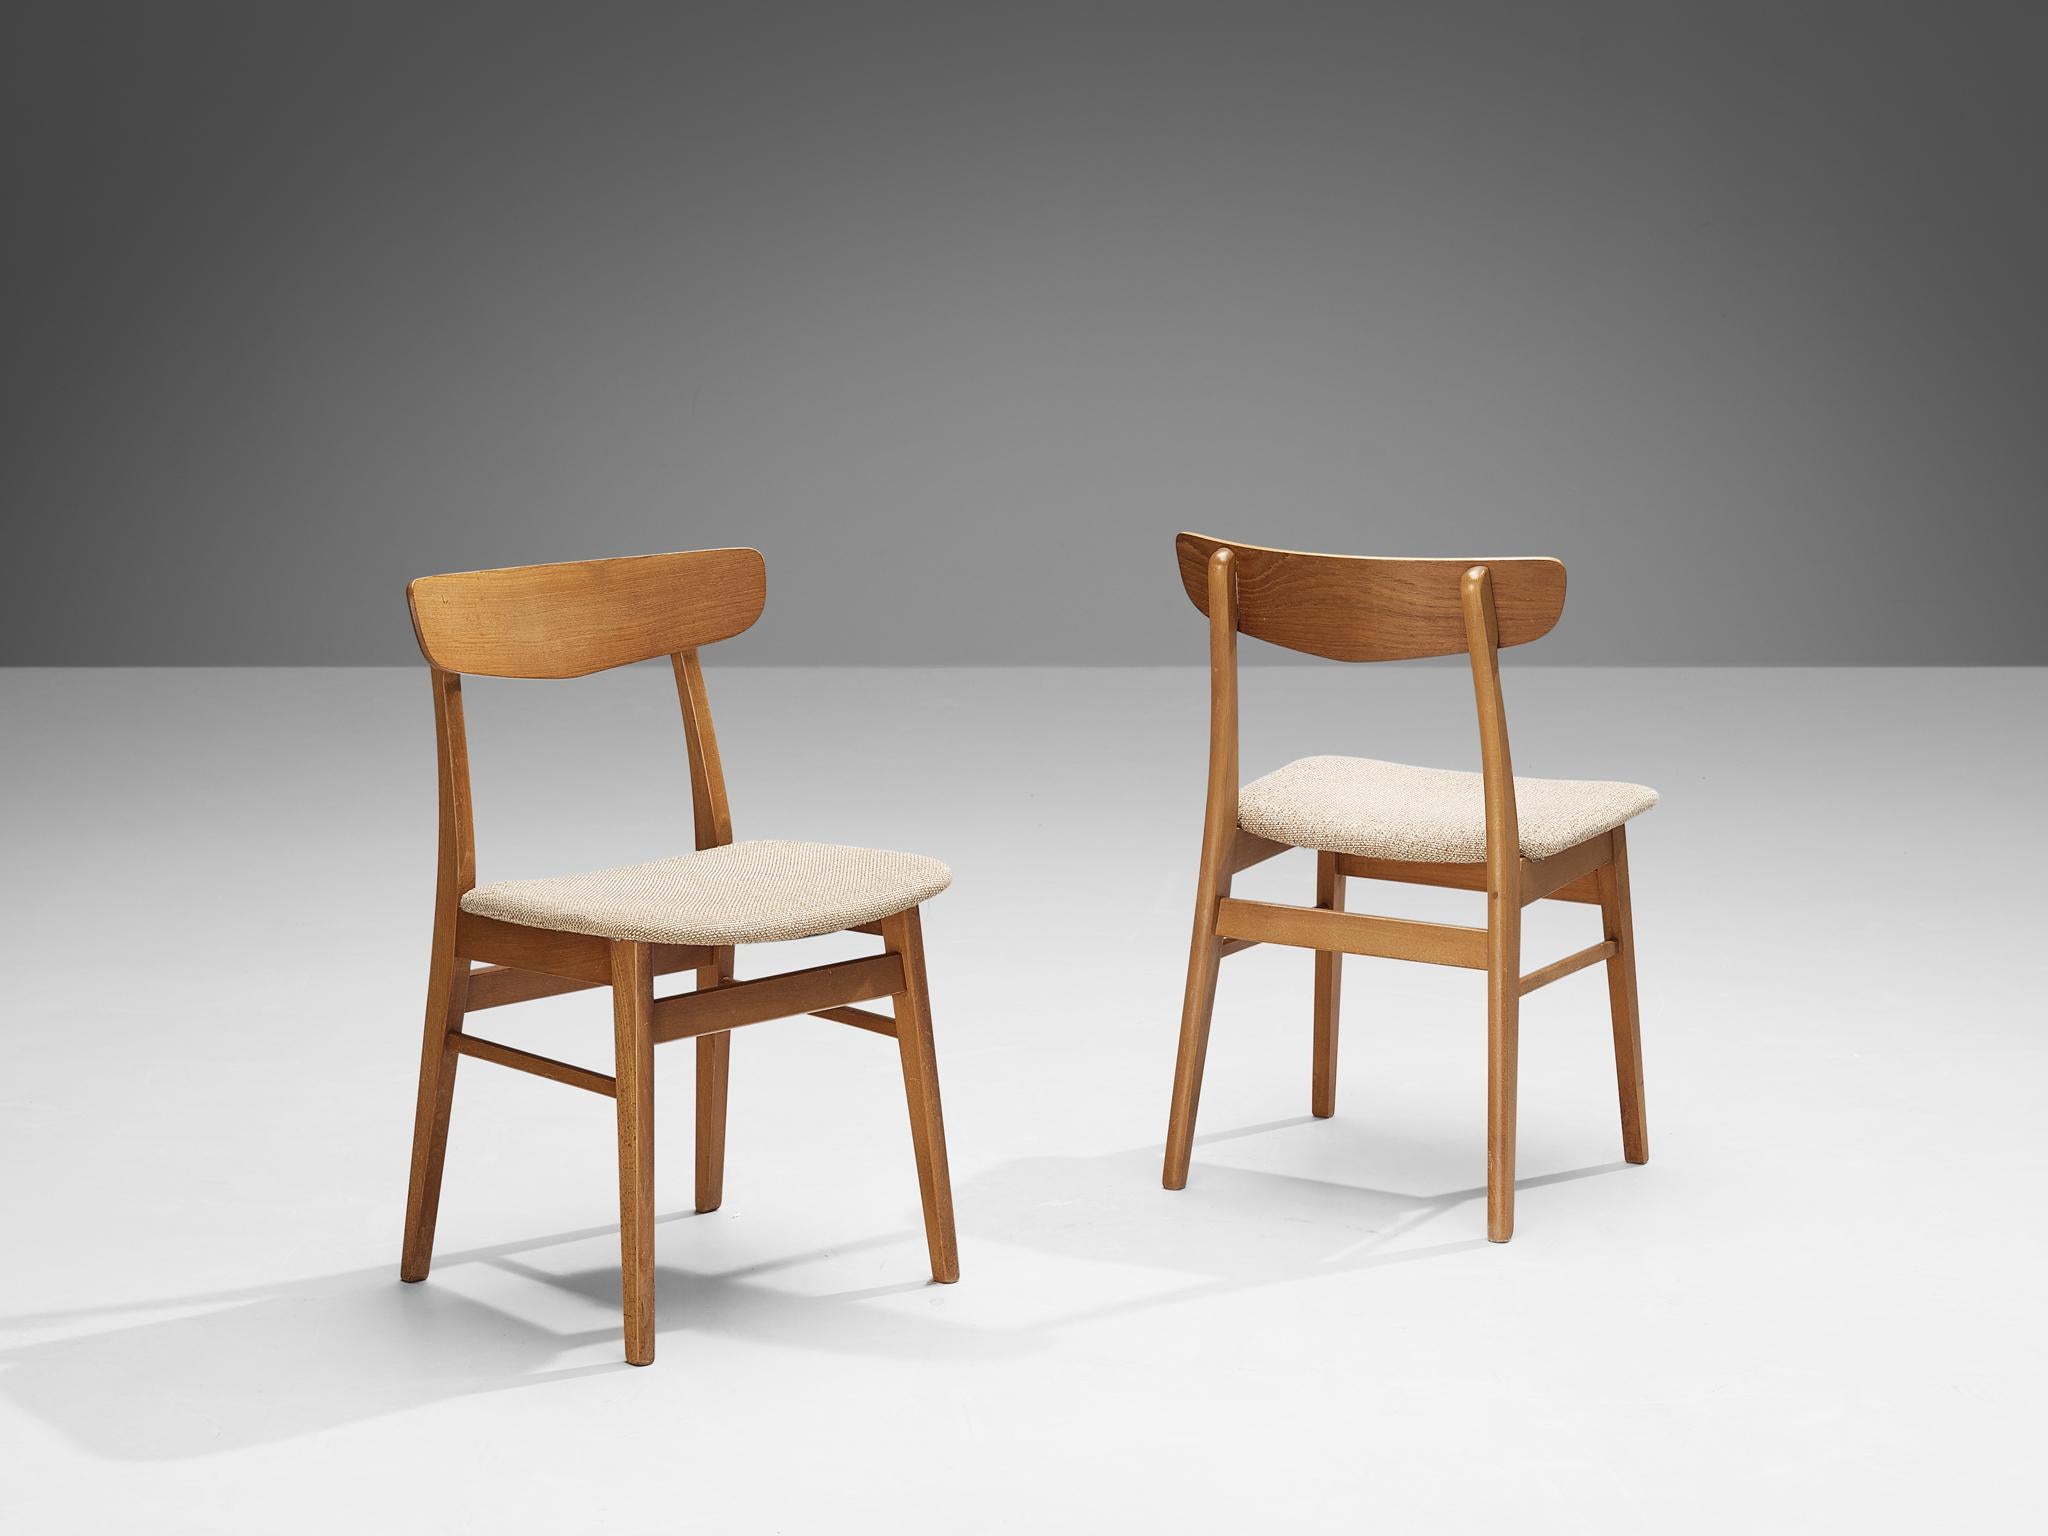 Dining chairs, teak, beech, fabric, Denmark, 1960s

These Danish dining chairs display a convincing aesthetic typical of the 1960s Danish furniture style, reminiscent of the work of Hans J. Wegner. The design is well-proportioned and balanced,